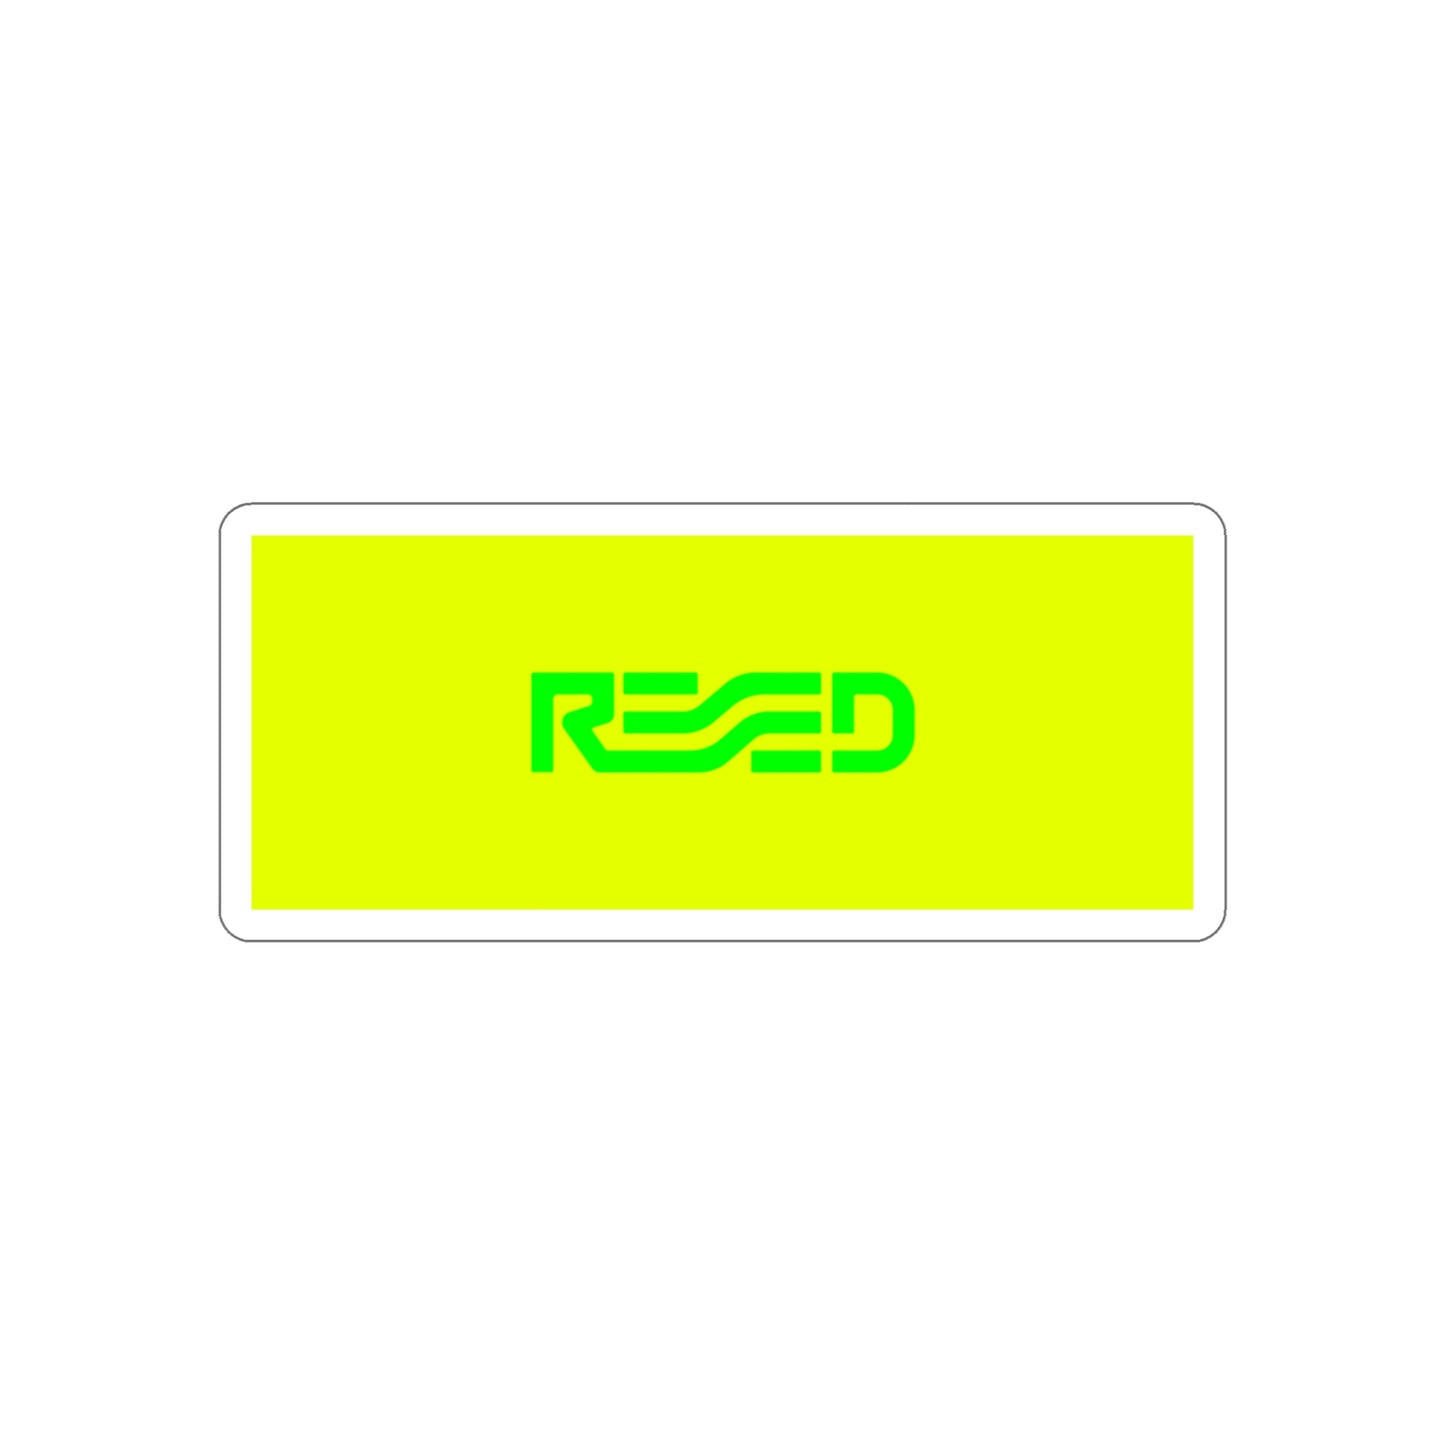 REED LOGO YELLOW/GREEN STICKER - Never Stop Chasing